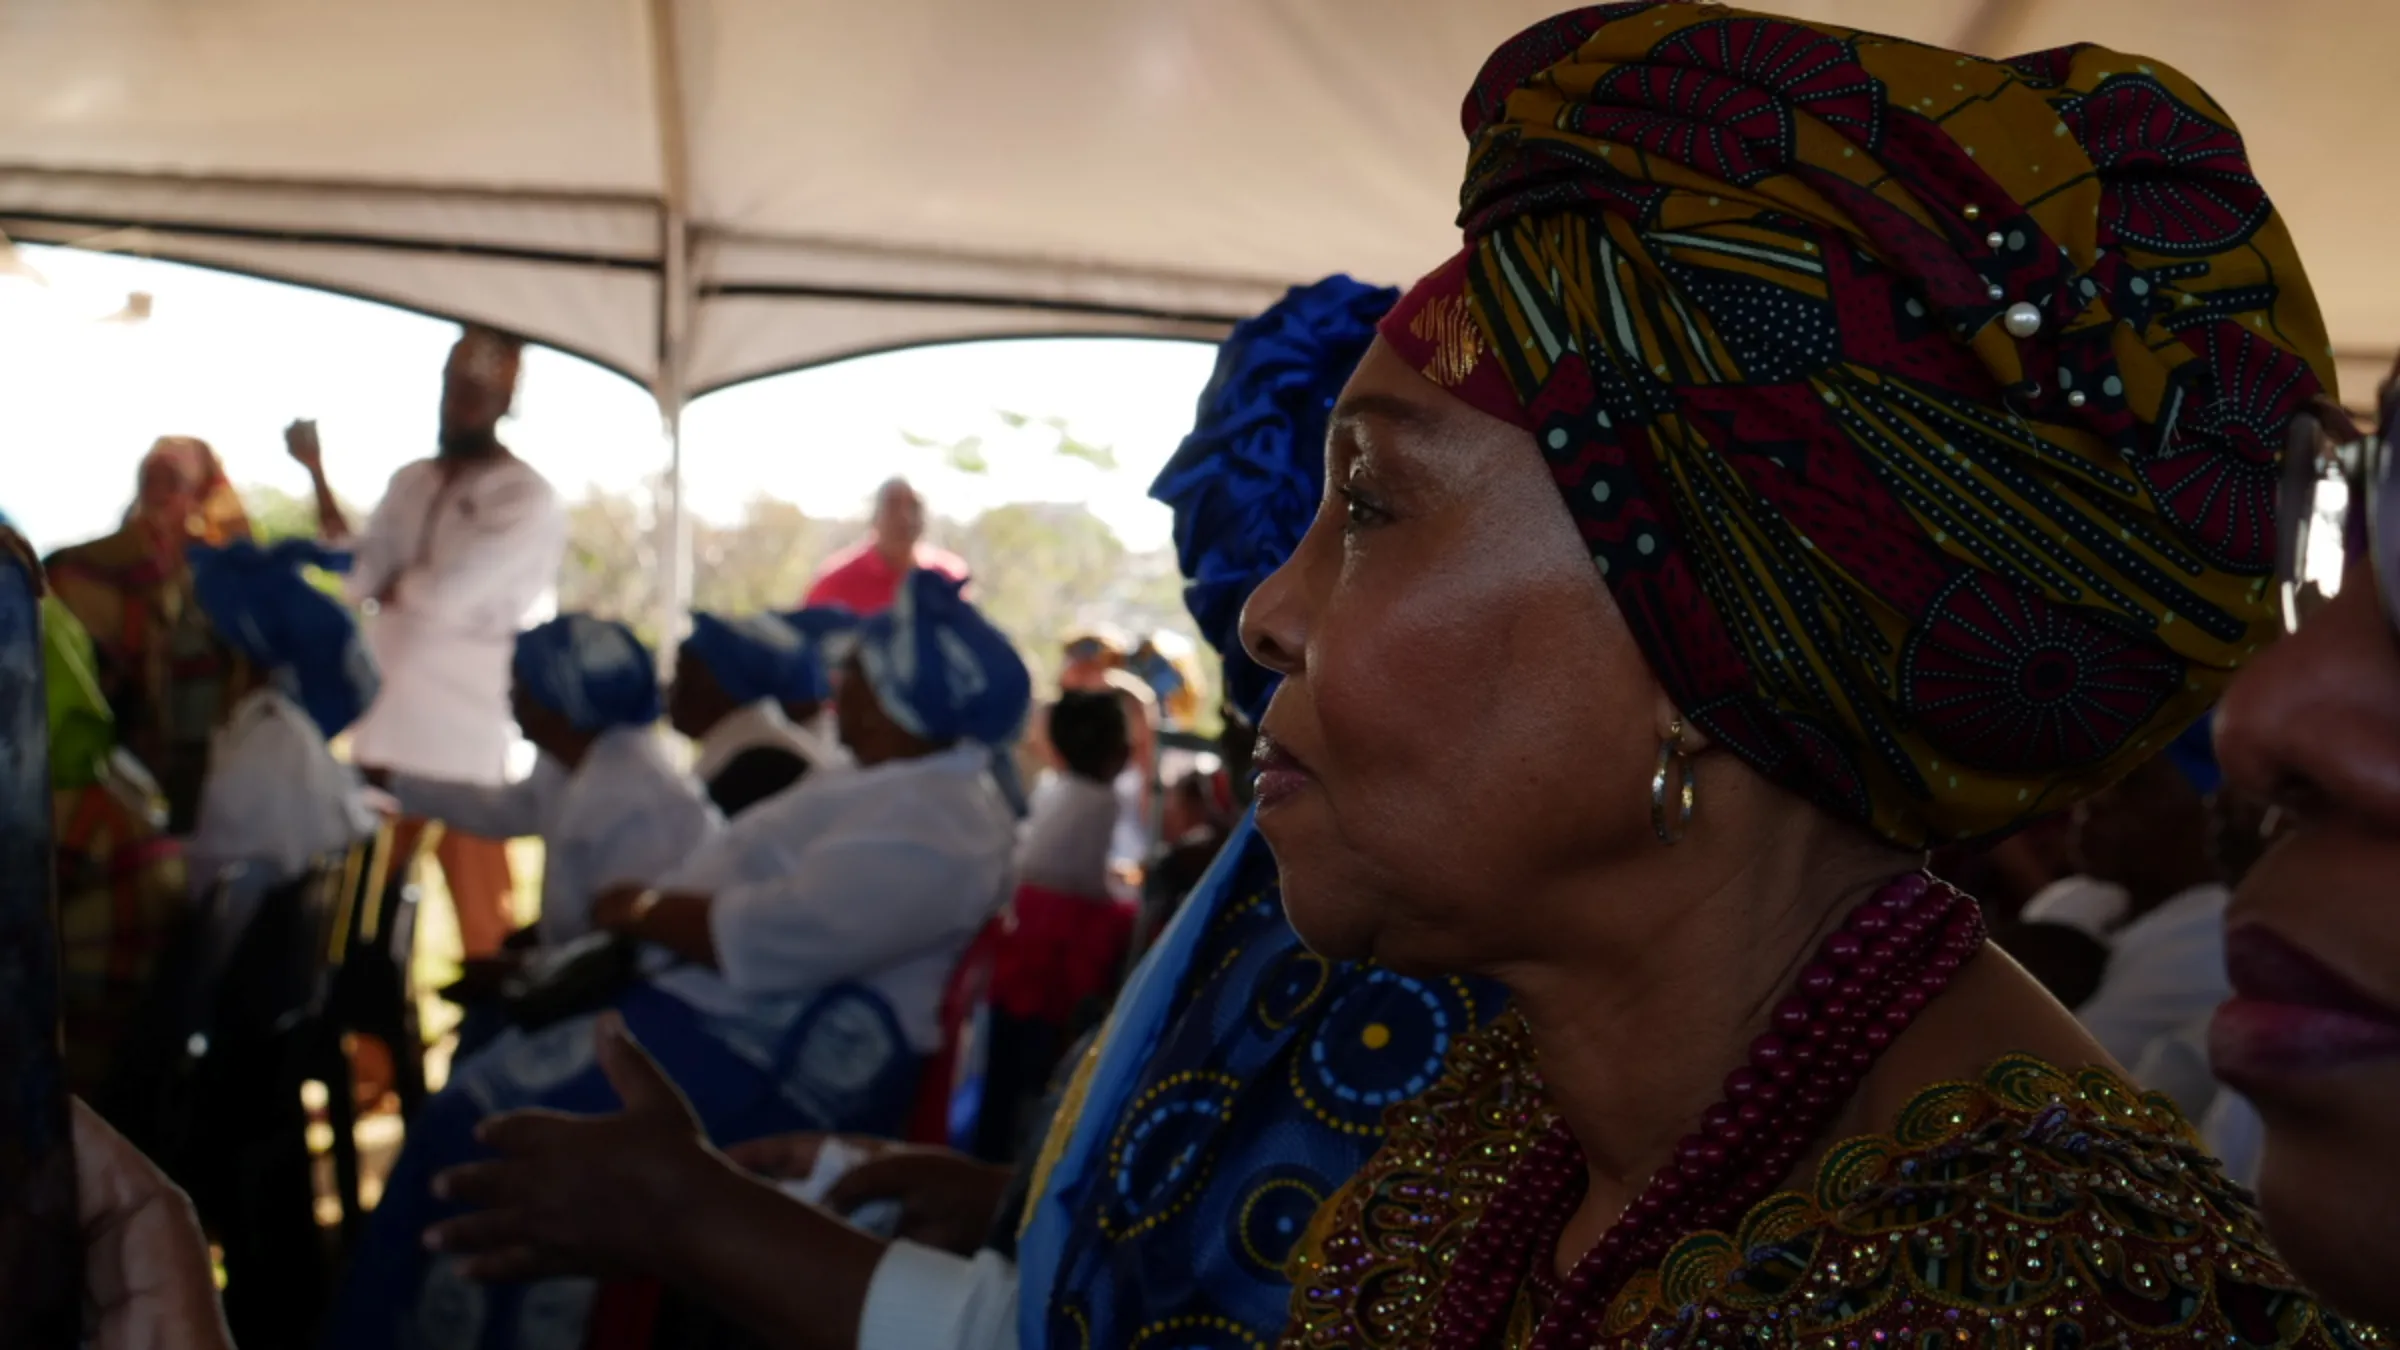 Catherine Salim looks on at the performances of a cultural event celebrating her ancestors’ freedom from slavery 150 years prior in Chatsworth, Durban, South Africa, August 6, 2023. Thomson Reuters Foundation/Kim Harrisberg